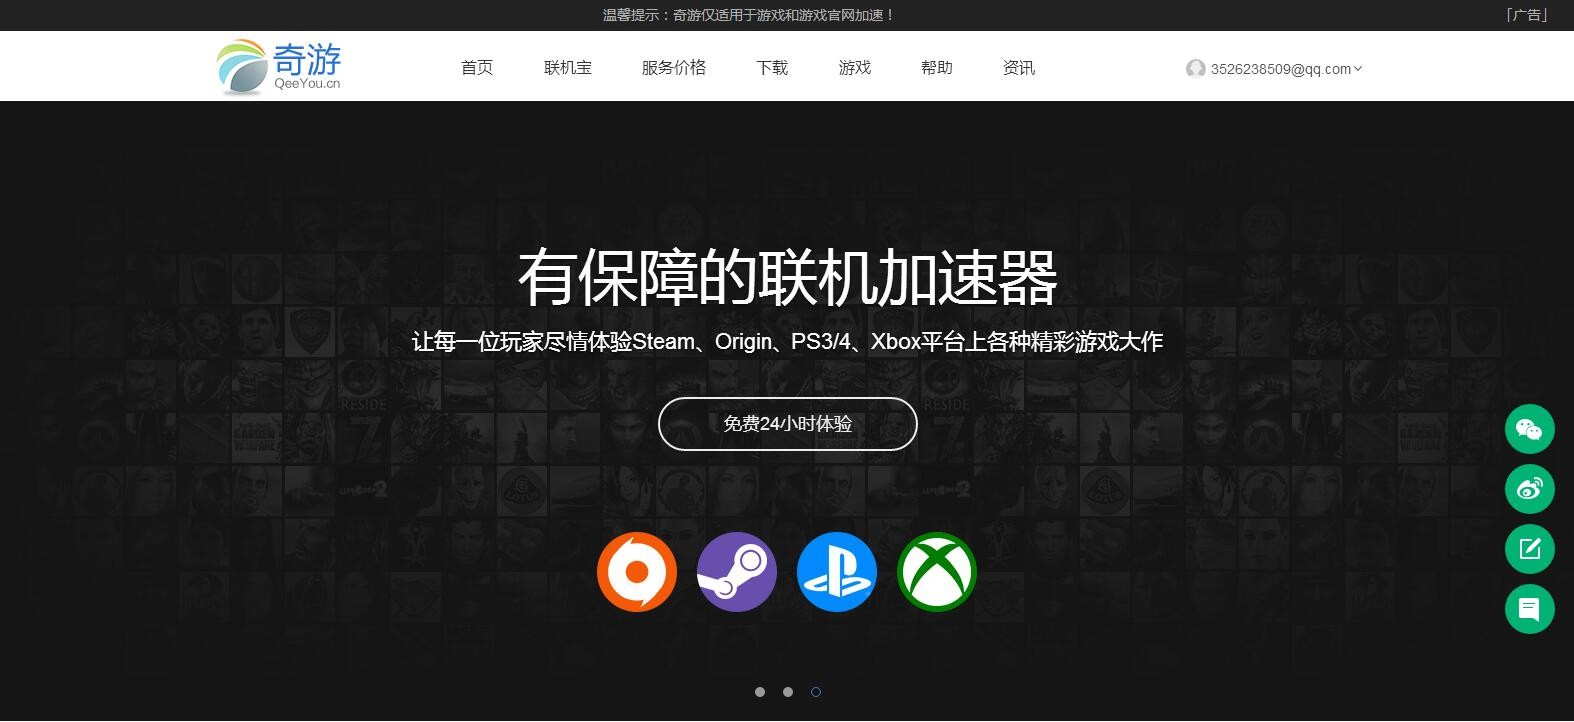 The games in Kuaiwan Game Box are getting less and less_The games in Kuaiwan Game Box_ Kuaiwan Game Box downloads games slowly